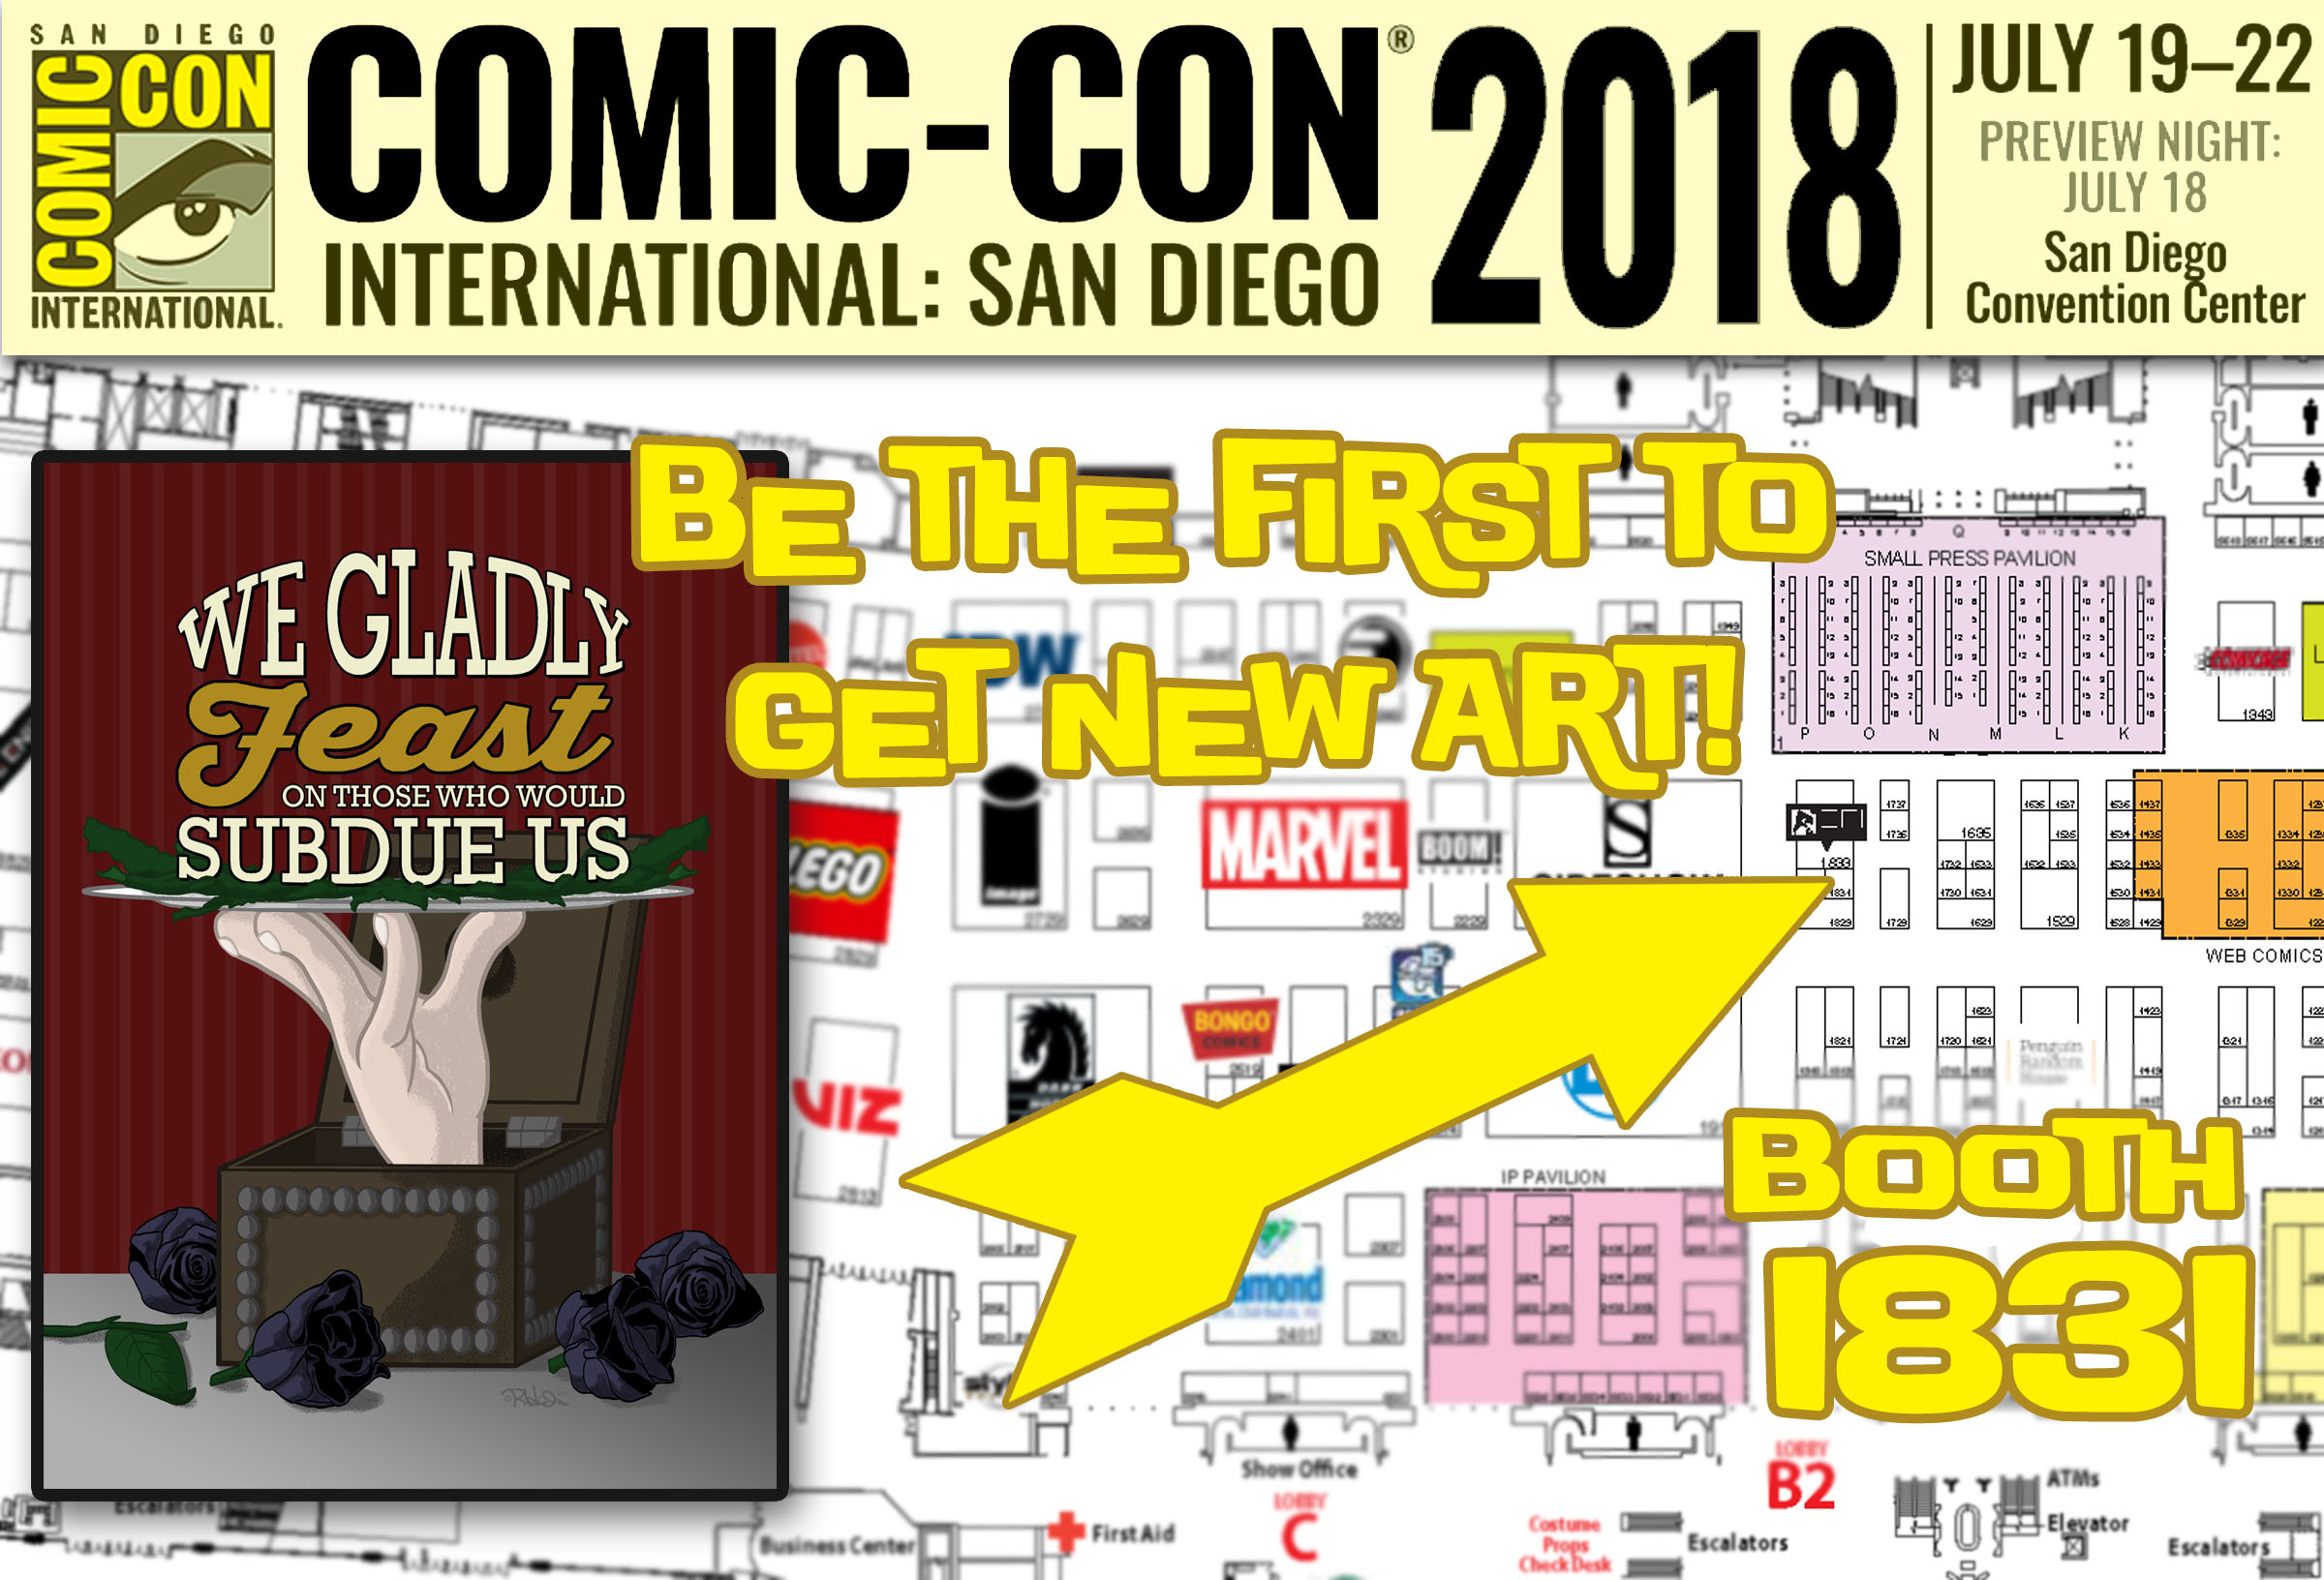 San Diego Comic-Con 2018 exhibitor floor map with the Little Vampires booth highlighted